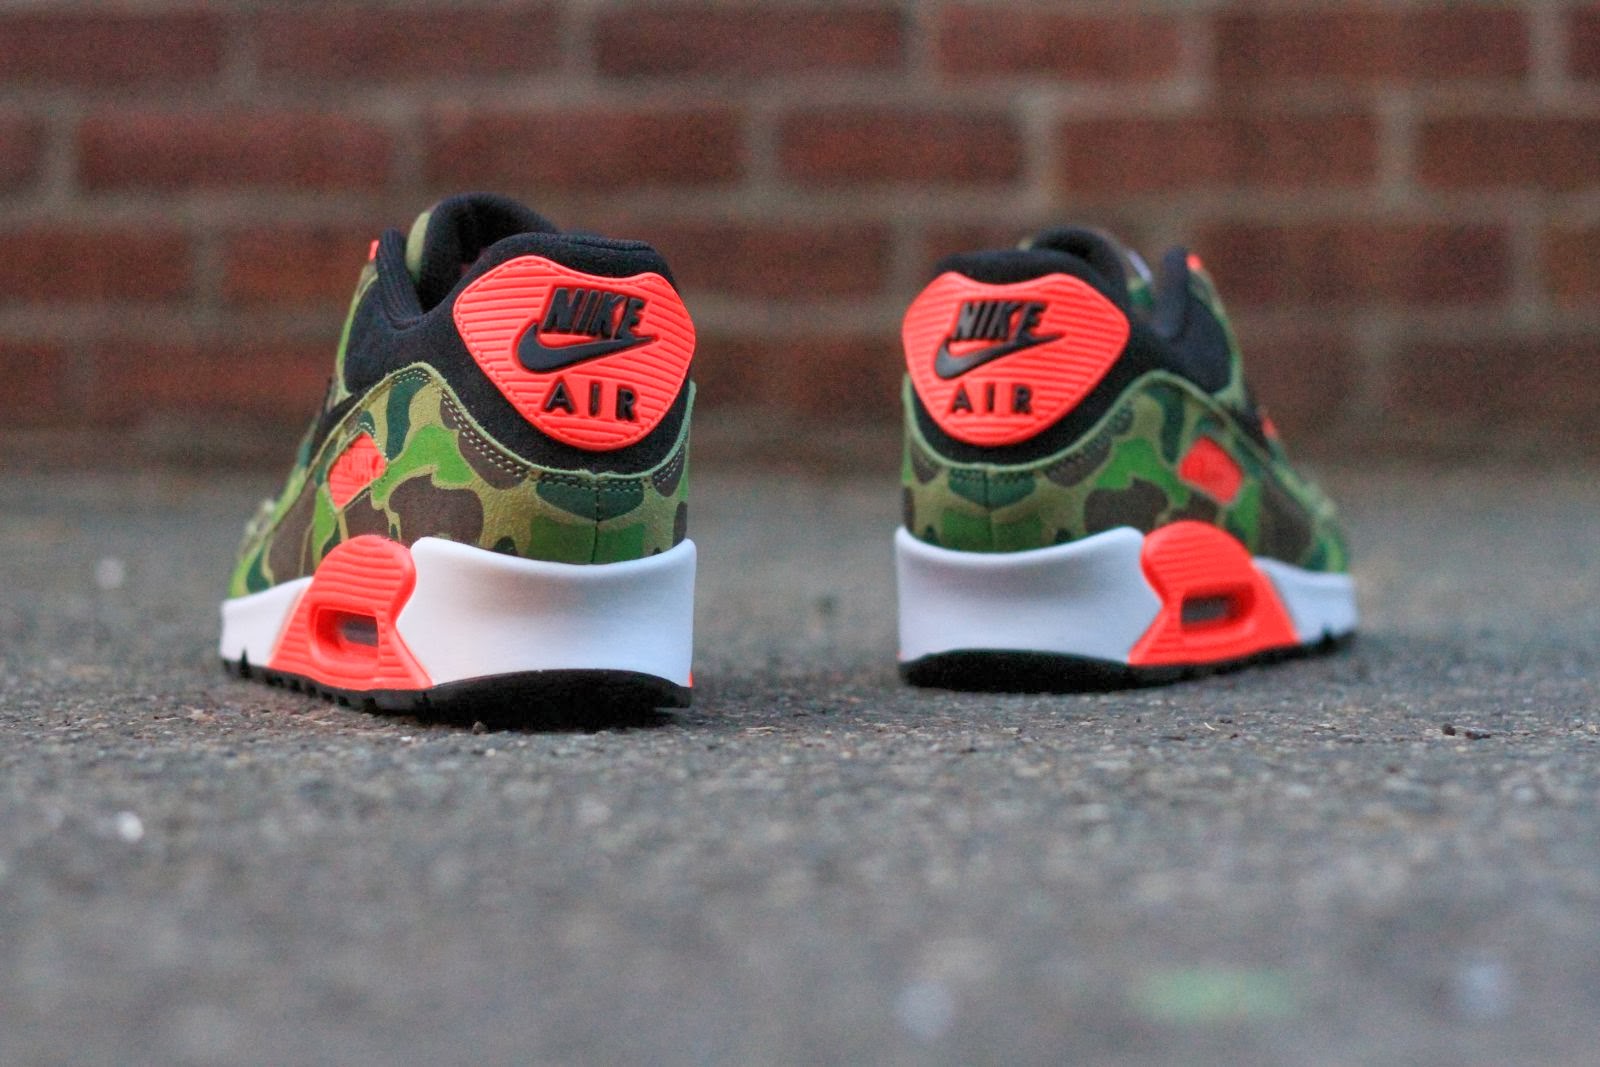 NWK to MIA: atmos x Nike Air Max 90 'Premium Camo Pack' - Available at